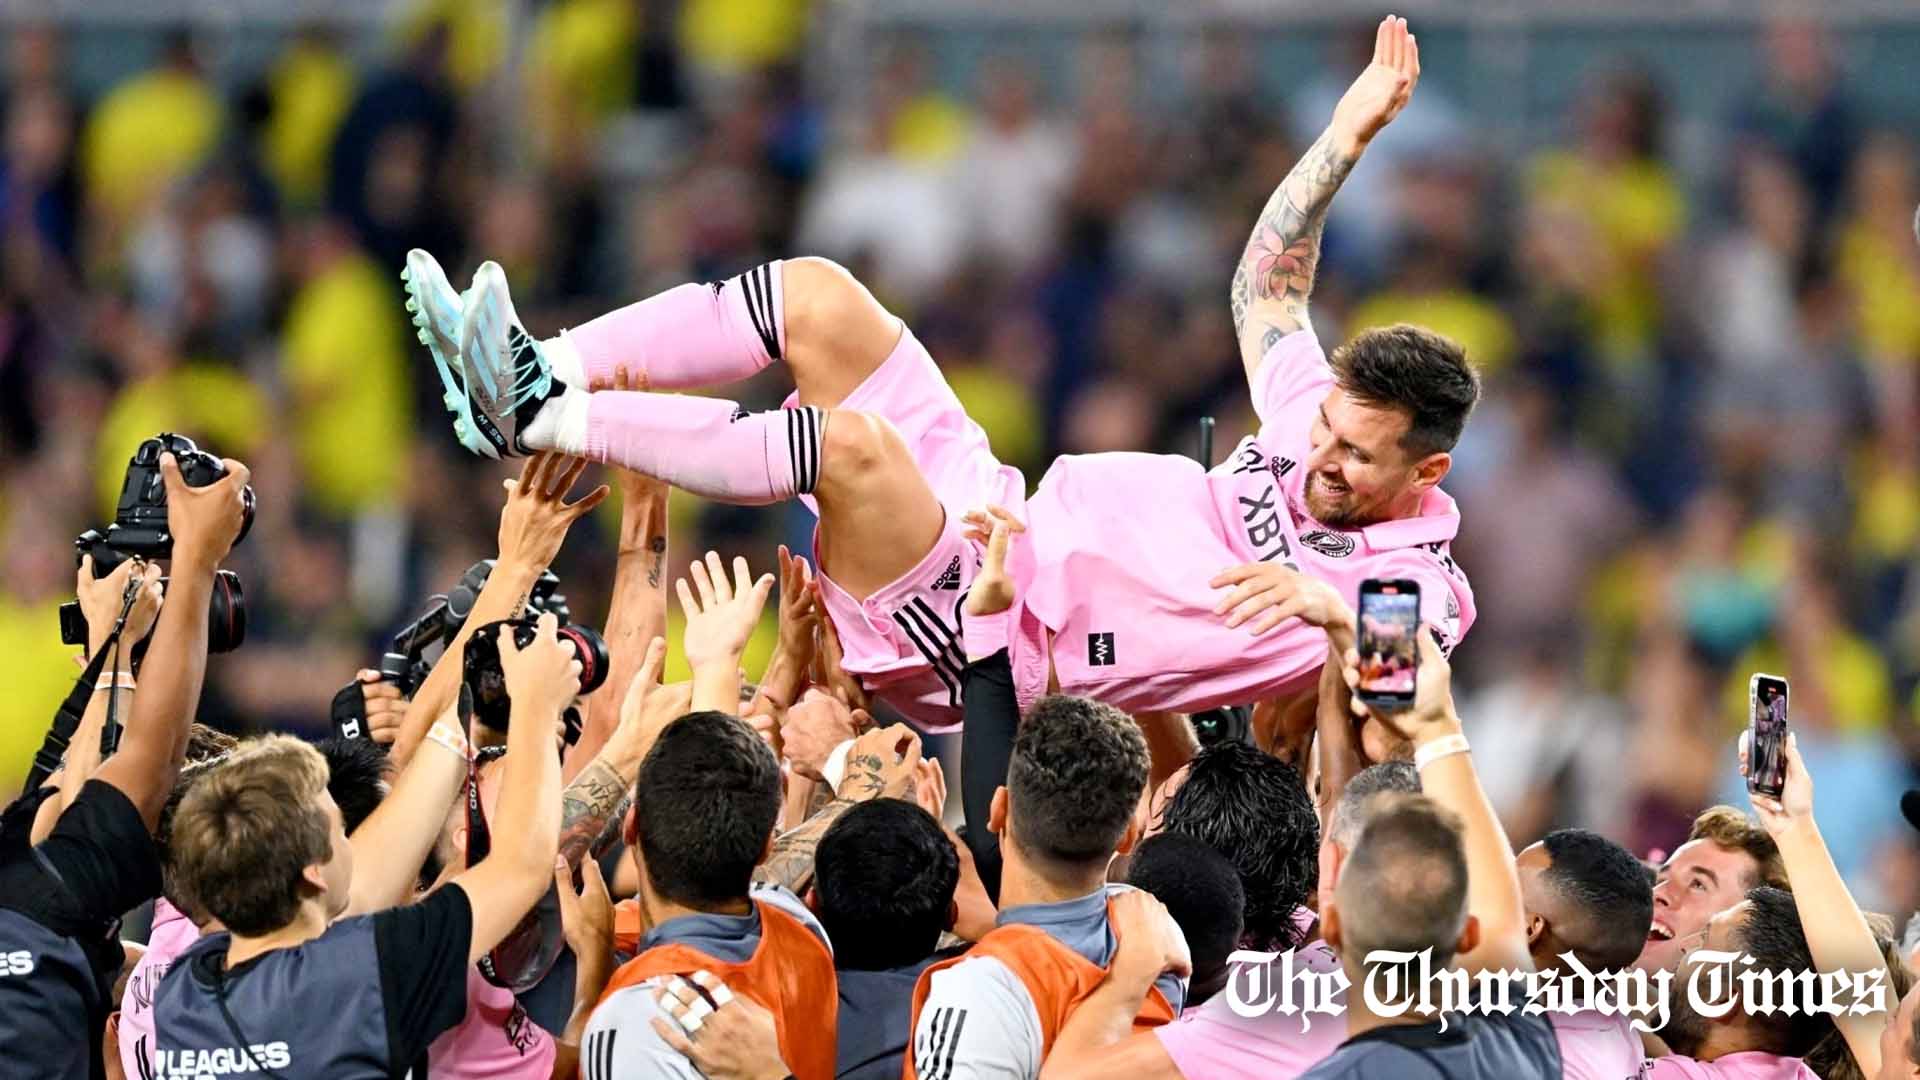 A file photo shows Inter Miami FC's winning moments of the 2023 Leagues Cup final at Nashville. — AFP/CHANDAN KHANNA